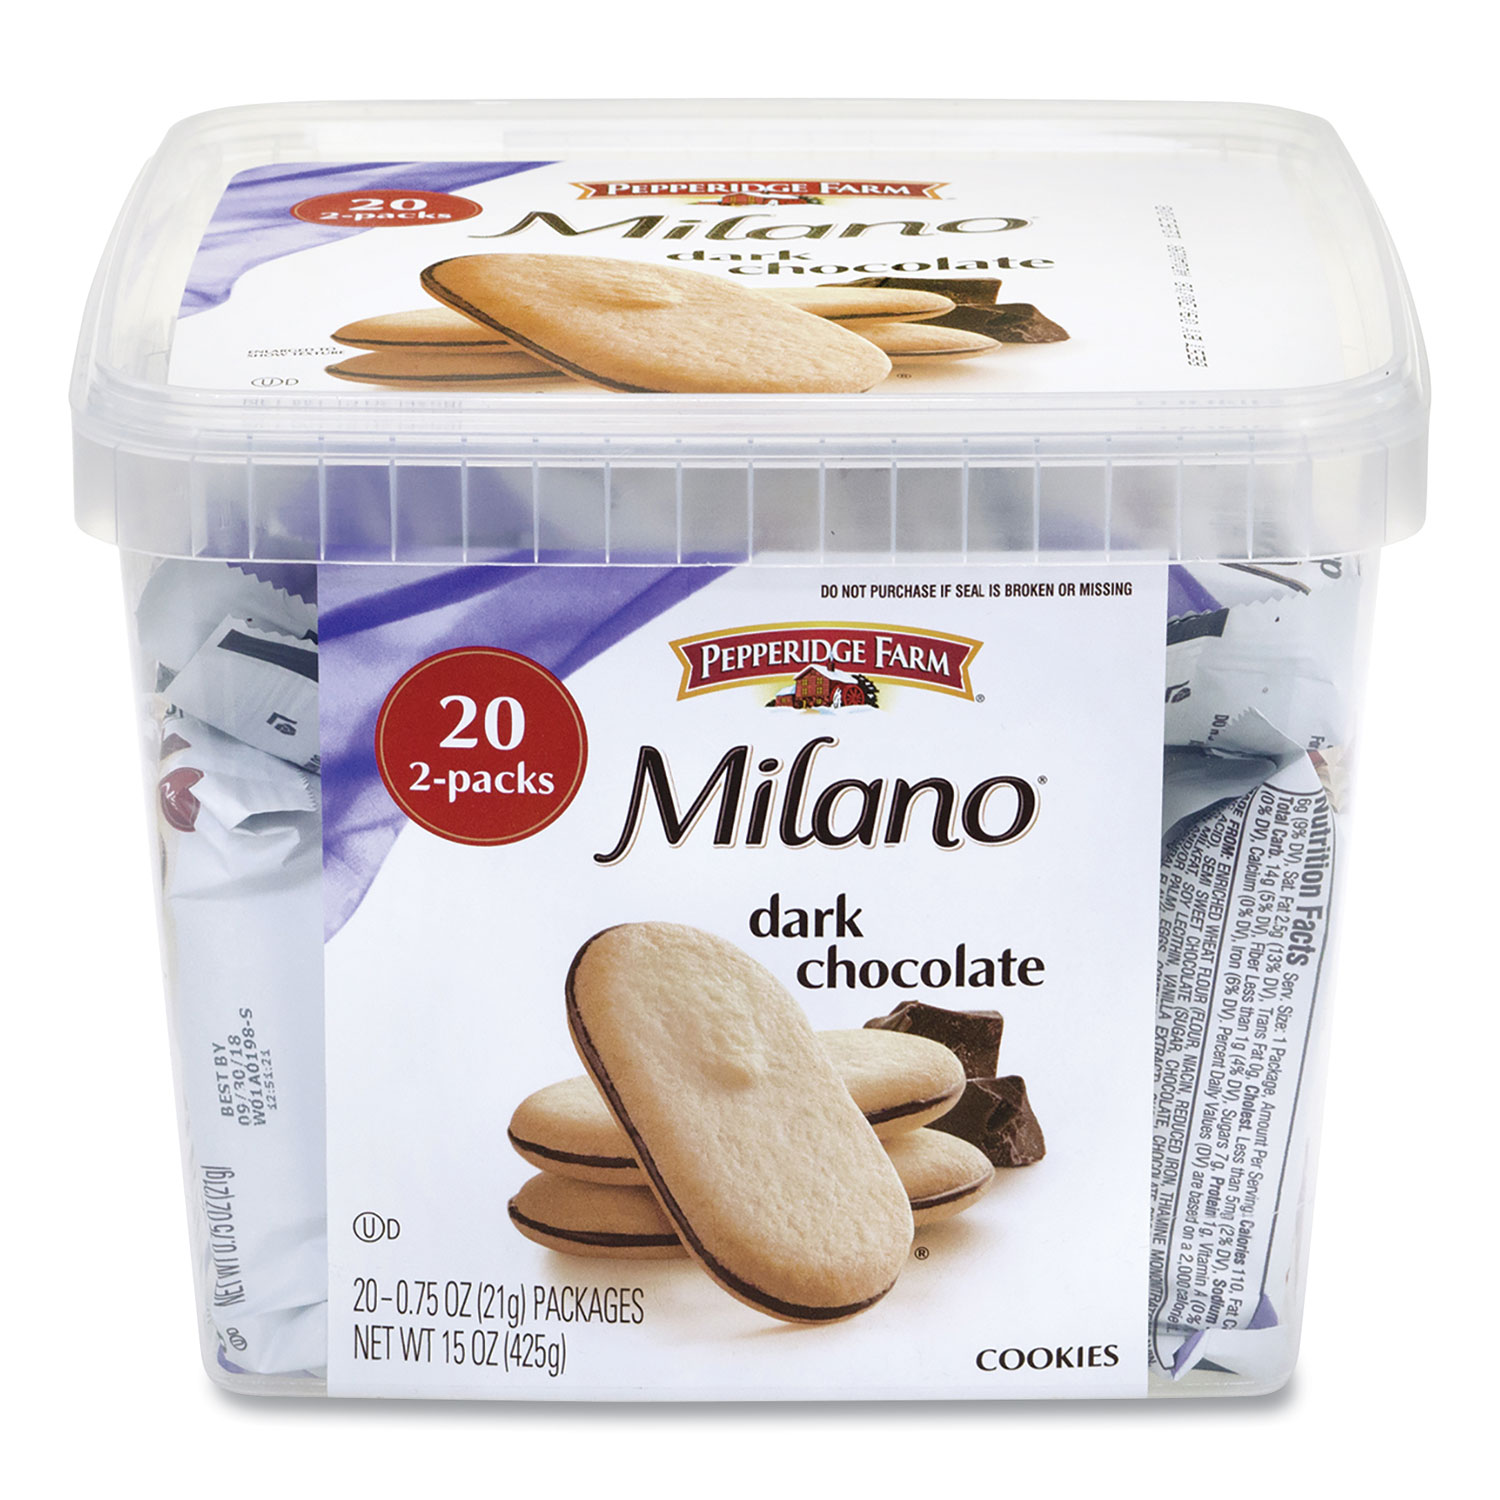  Pepperidge Farm 31439 Milano Dark Chocolate Cookies, 0.75 oz Pack, 20 Packs/Box, Free Delivery in 1-4 Business Days (GRR22000088) 